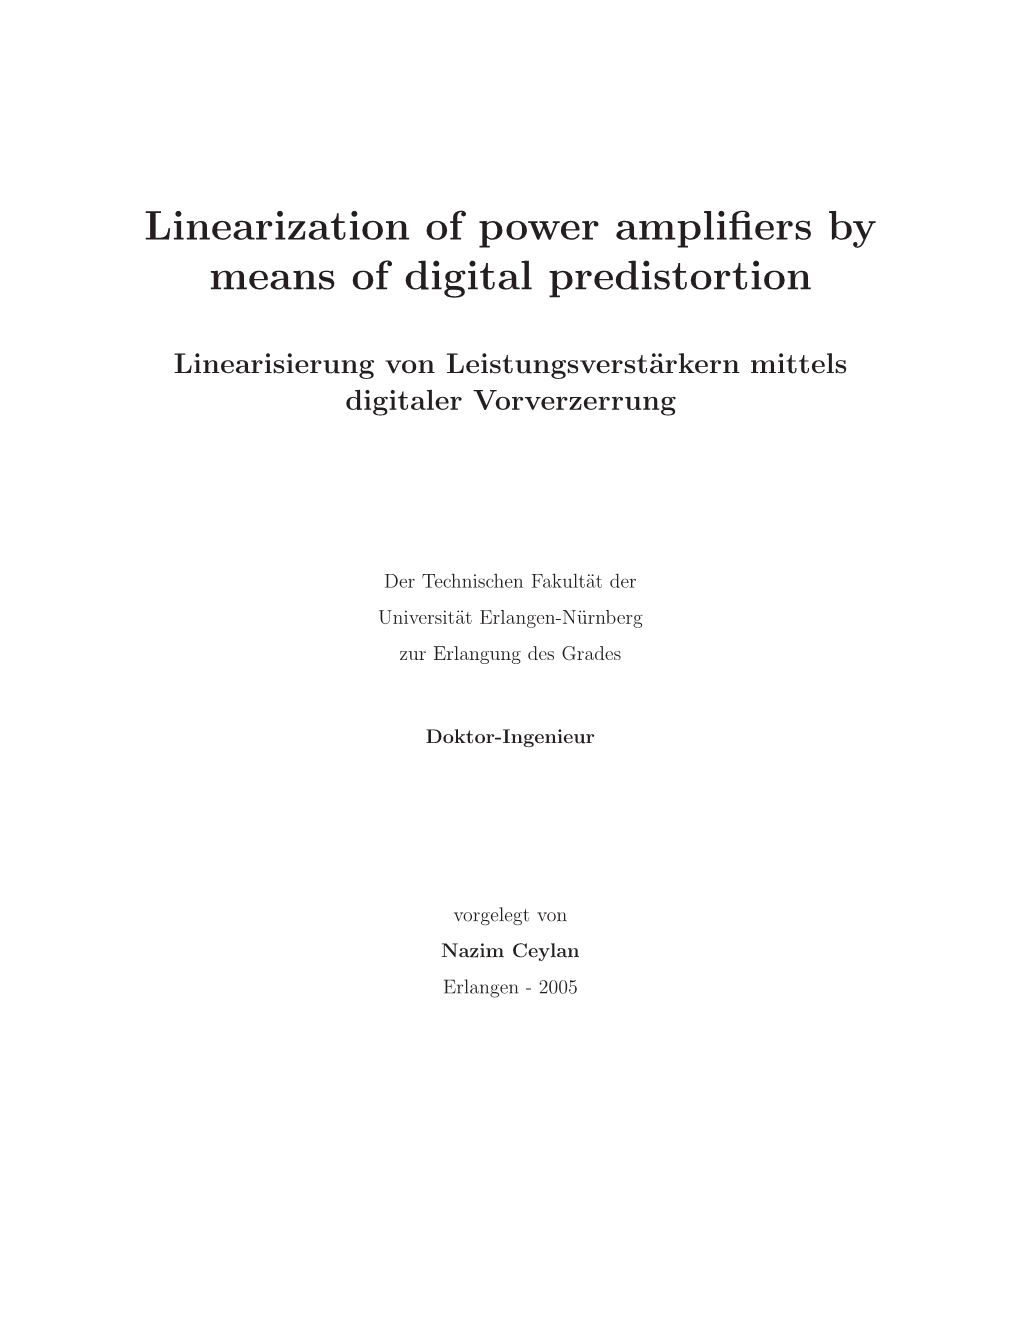 Linearization of Power Amplifiers by Means of Digital Predistortion